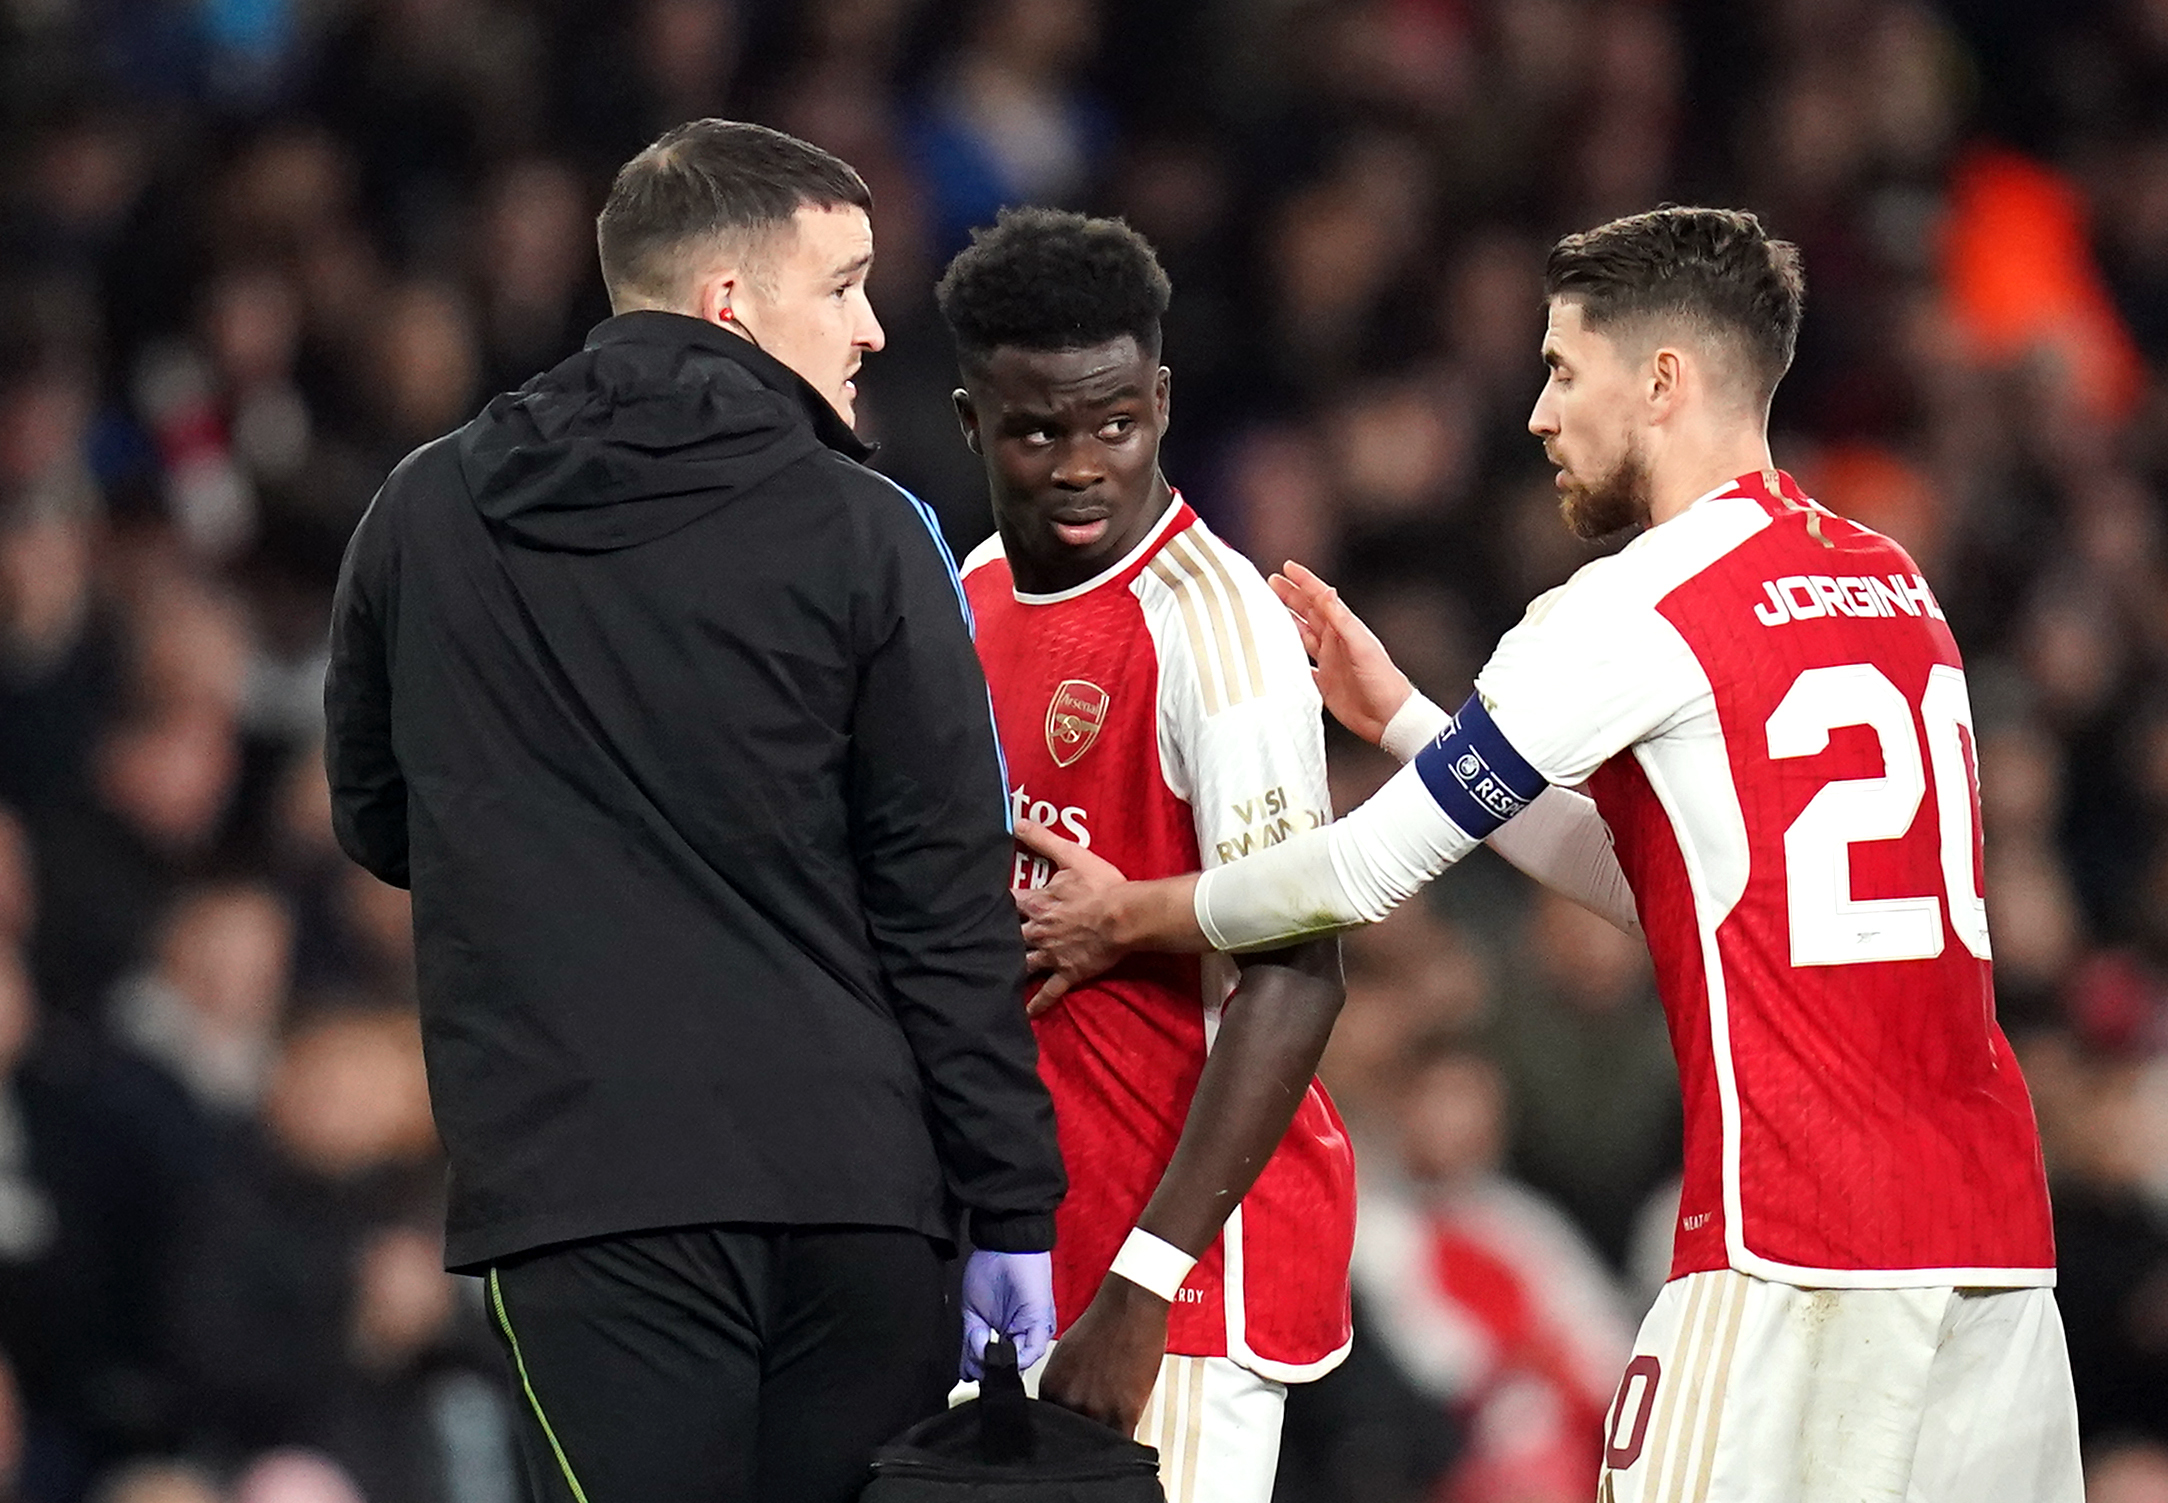 Bukayo Saka, centre, limped off injured with five minutes remaining